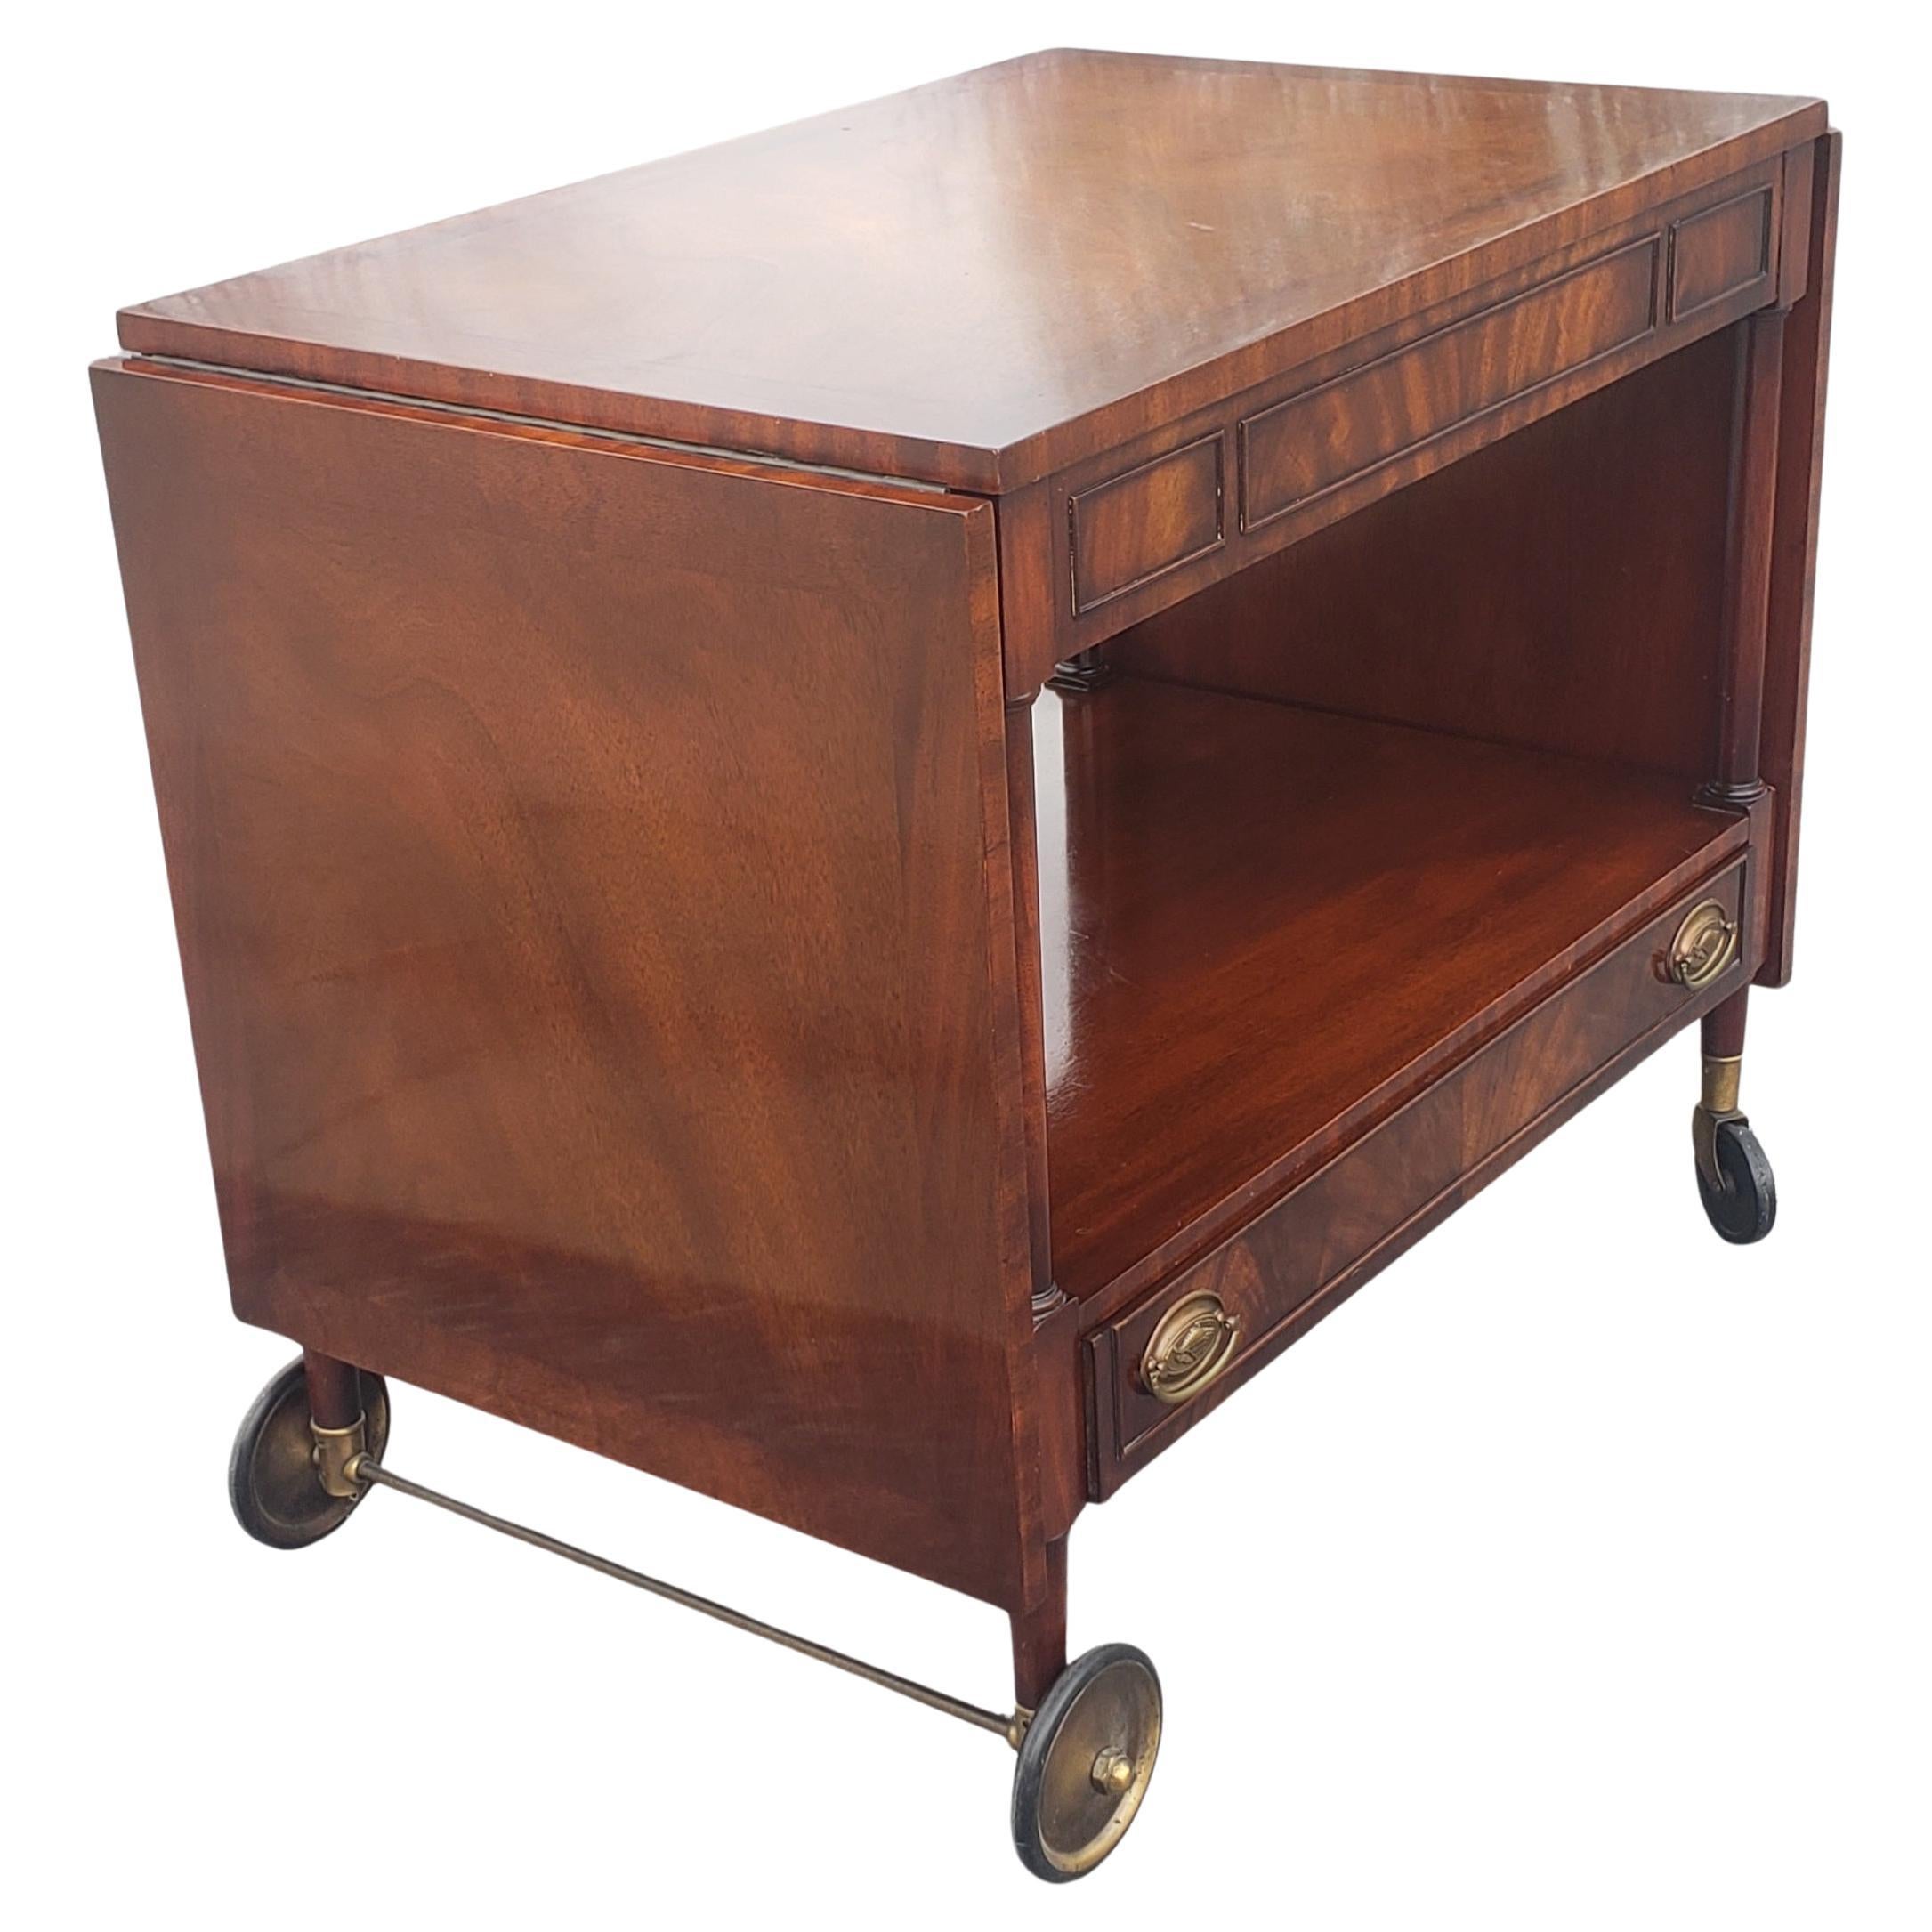 Weiman George III Style Swirl Mahogany Drop-Leaf Serving Cart, circa 1960s In Good Condition For Sale In Germantown, MD